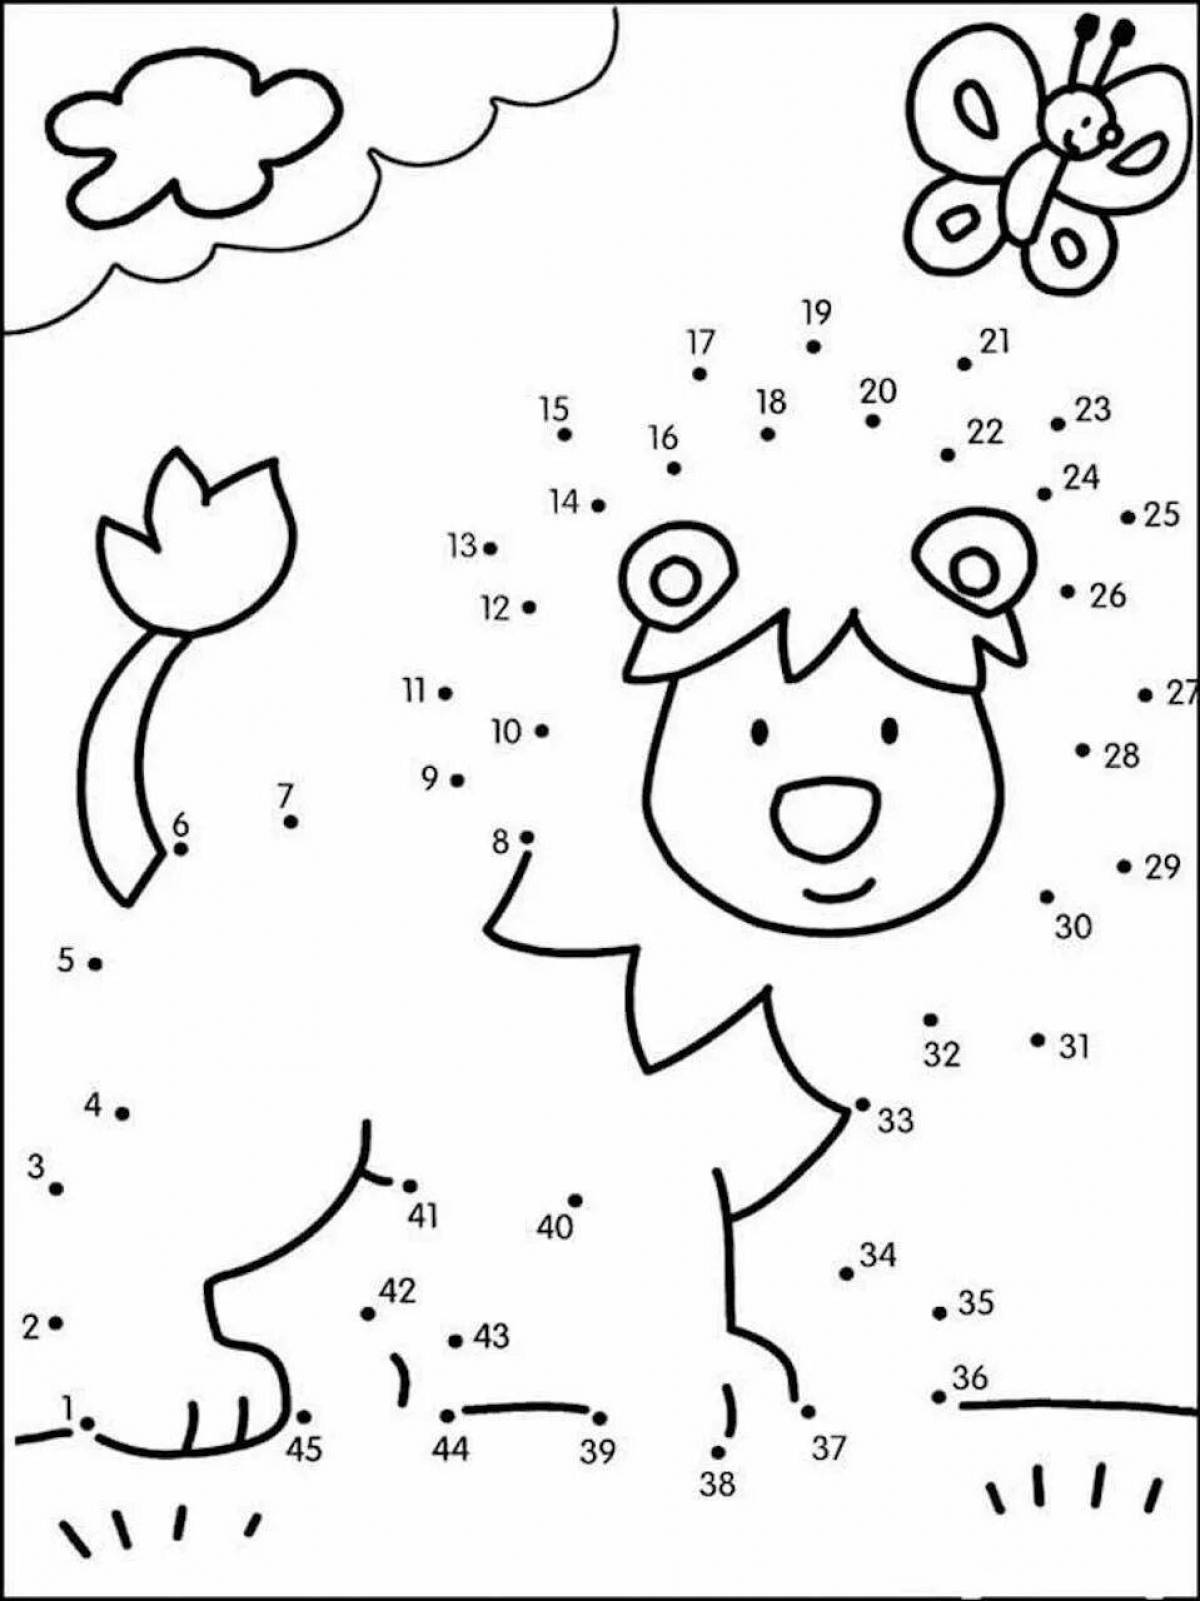 Connect the dots stimulating coloring book for 5 year olds